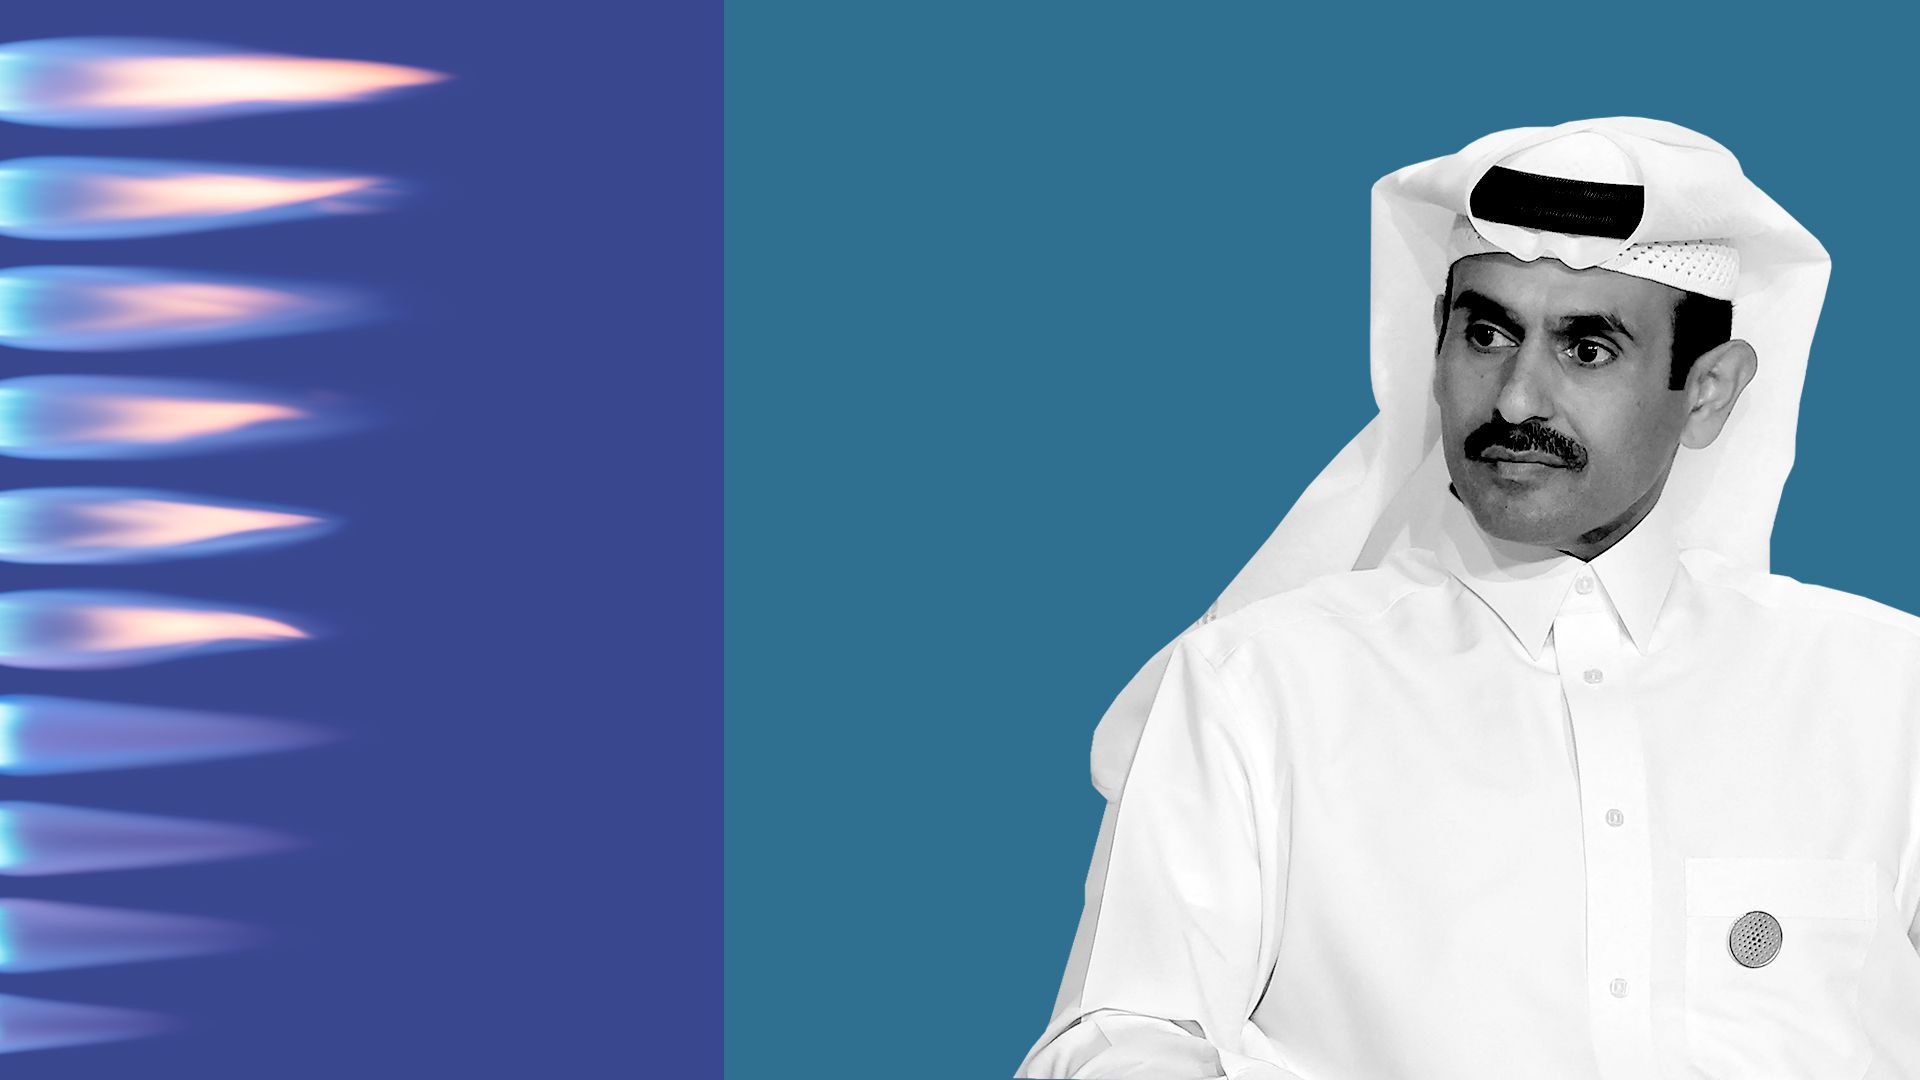 Photo illustration of Energy Minister for Qatar Saad Sherida al-Kaabi and an image of natural gas flames